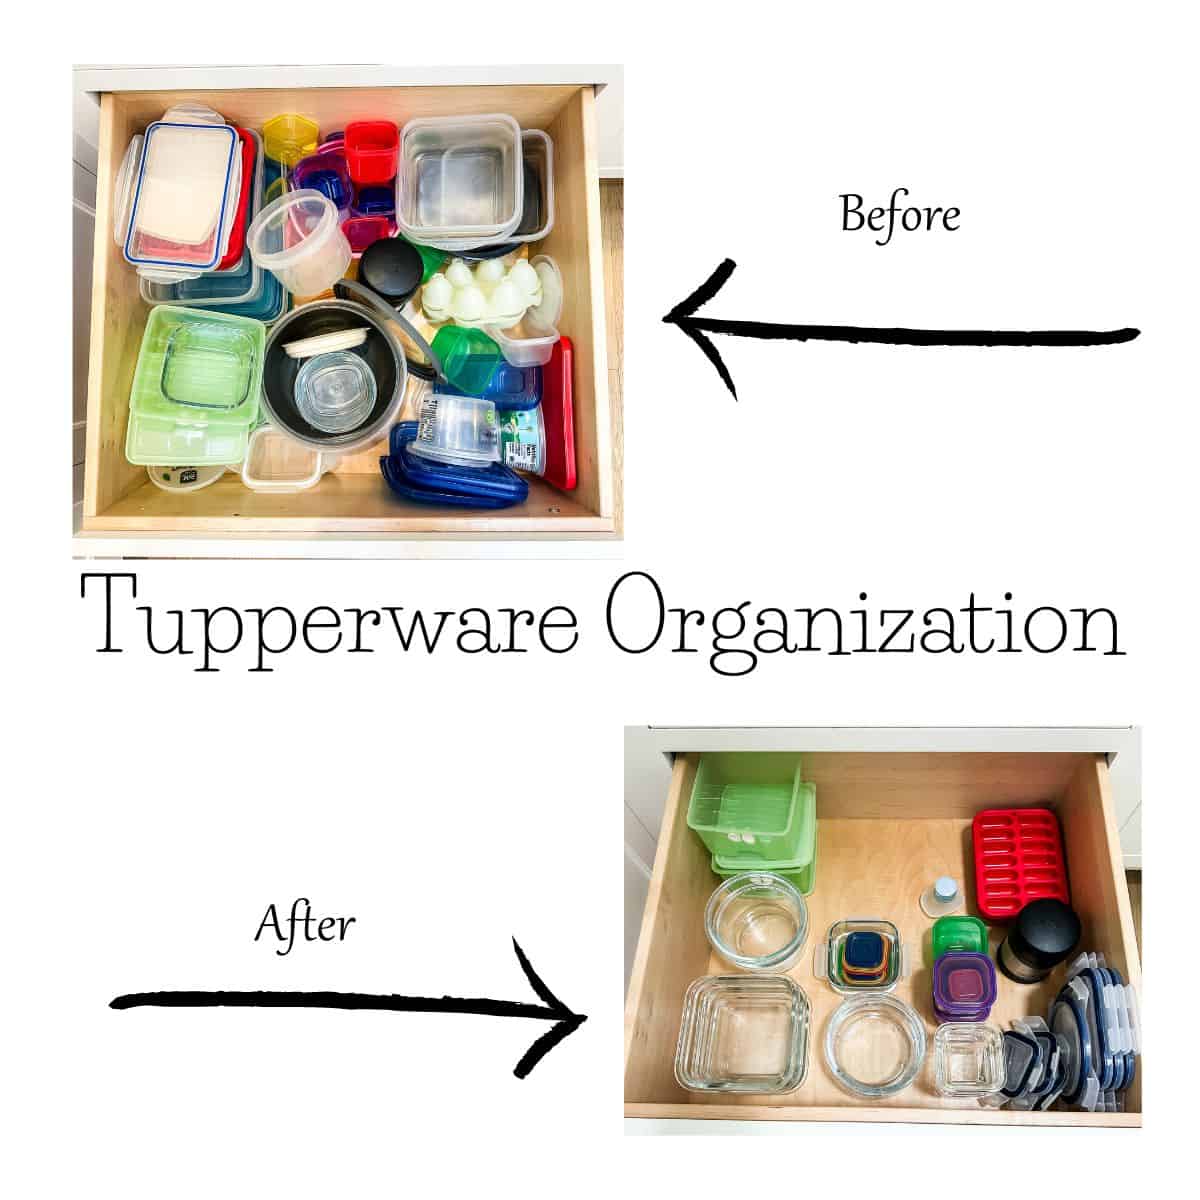 The before and after of my tupperware organization with text overlay.